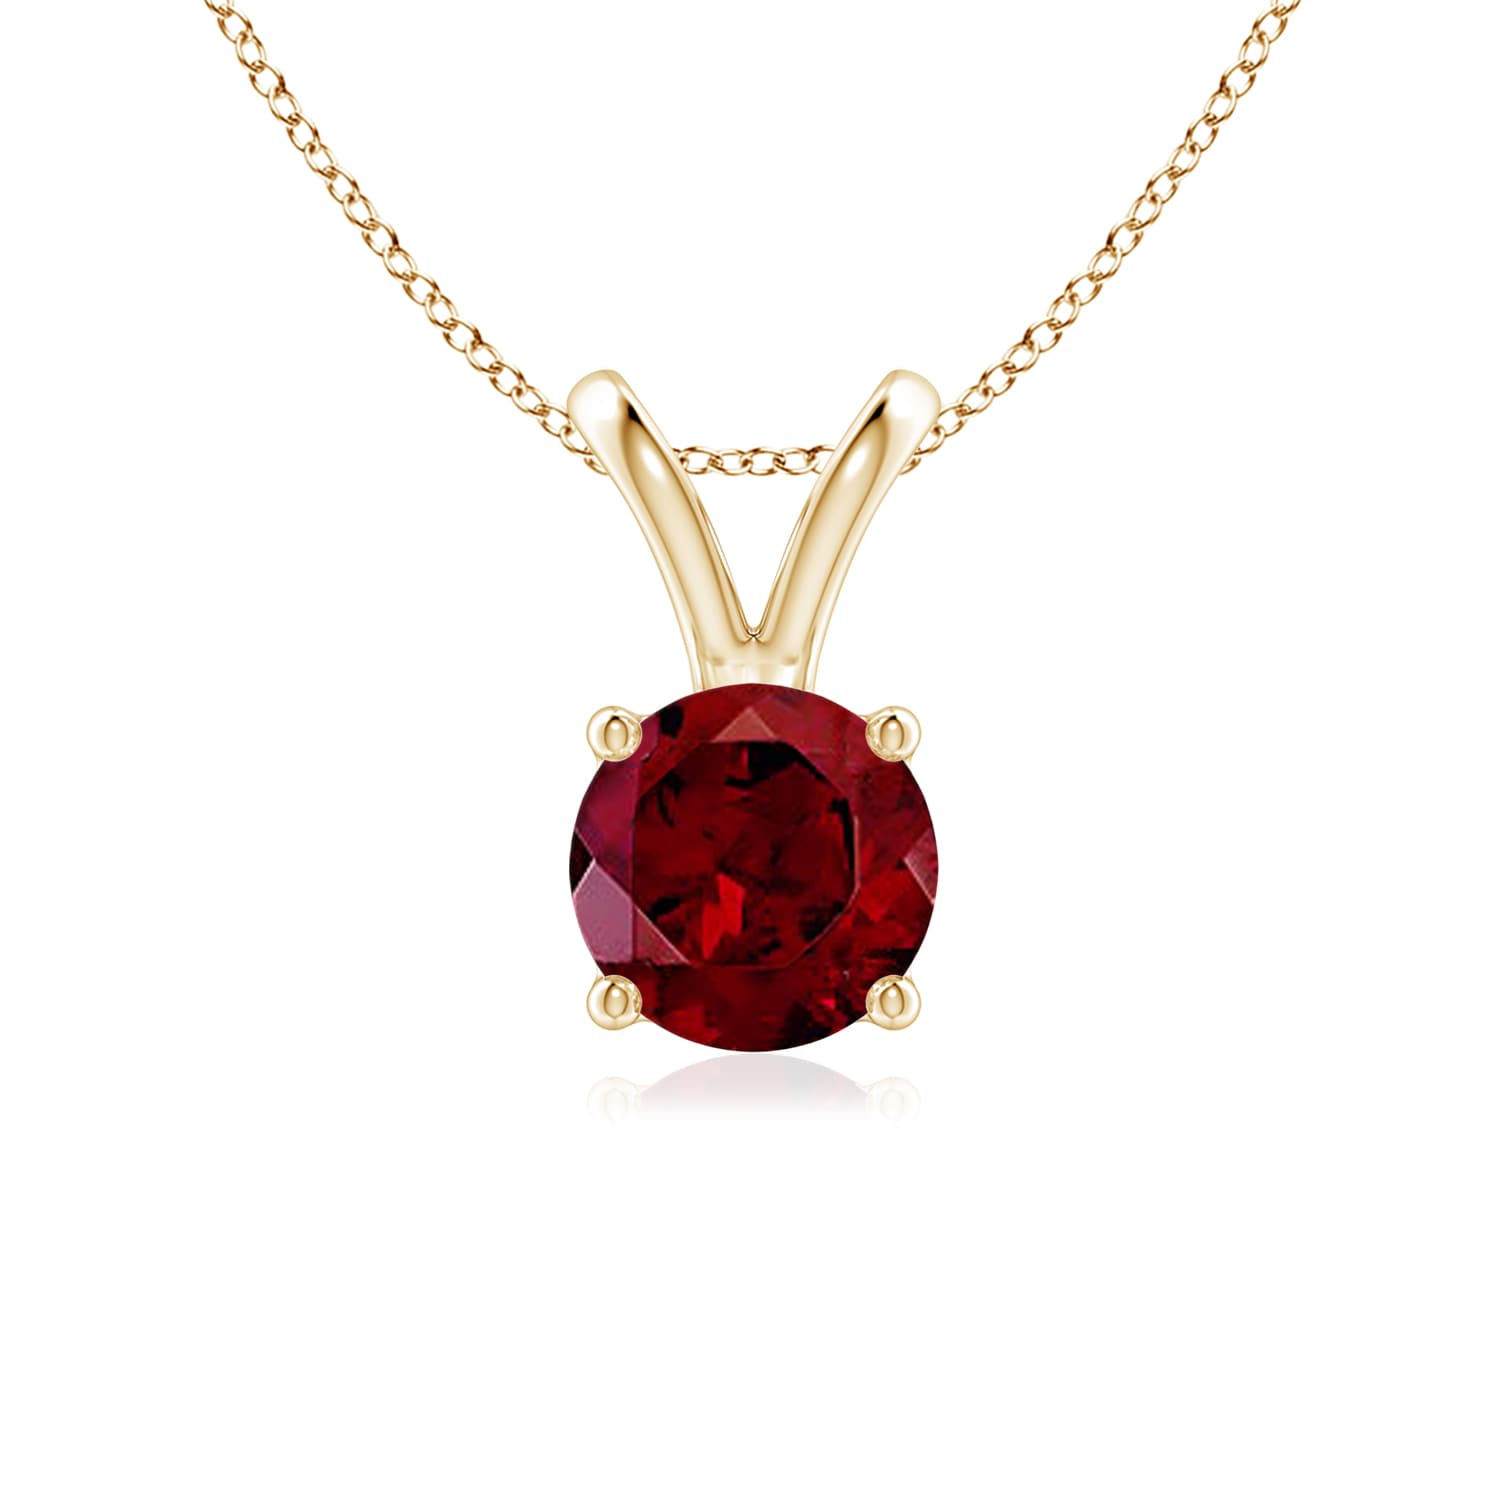 14k Gold and Garnet January Birthstone Solitaire Necklace